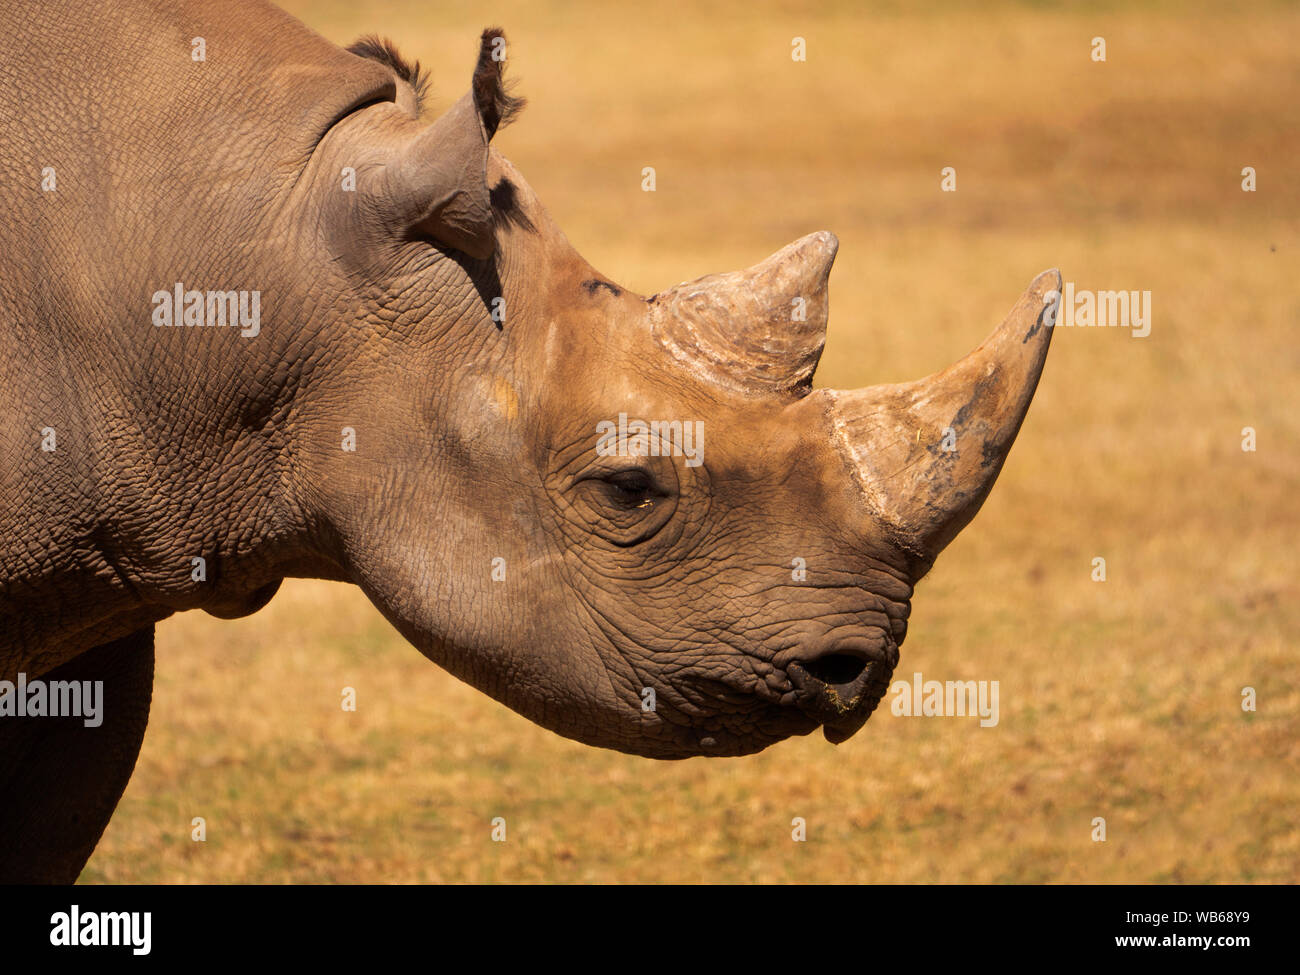 A Black Rhinoceros, Diceros bicornis, is critically endangered and is in a captive breeding program. Stock Photo